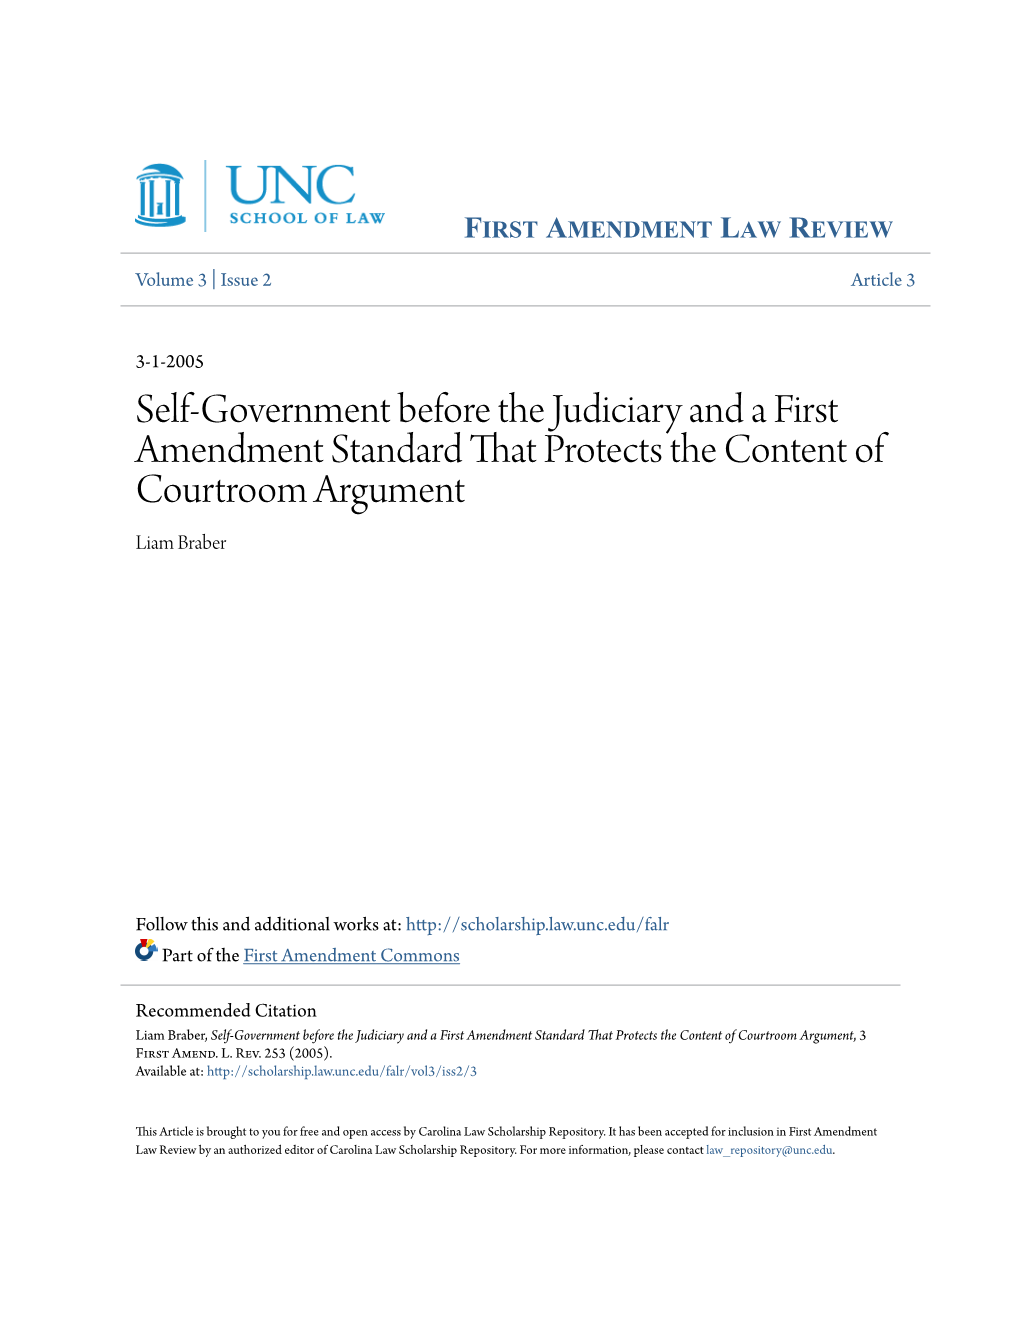 Self-Government Before the Judiciary and a First Amendment Standard That Protects the Content of Courtroom Argument Liam Braber